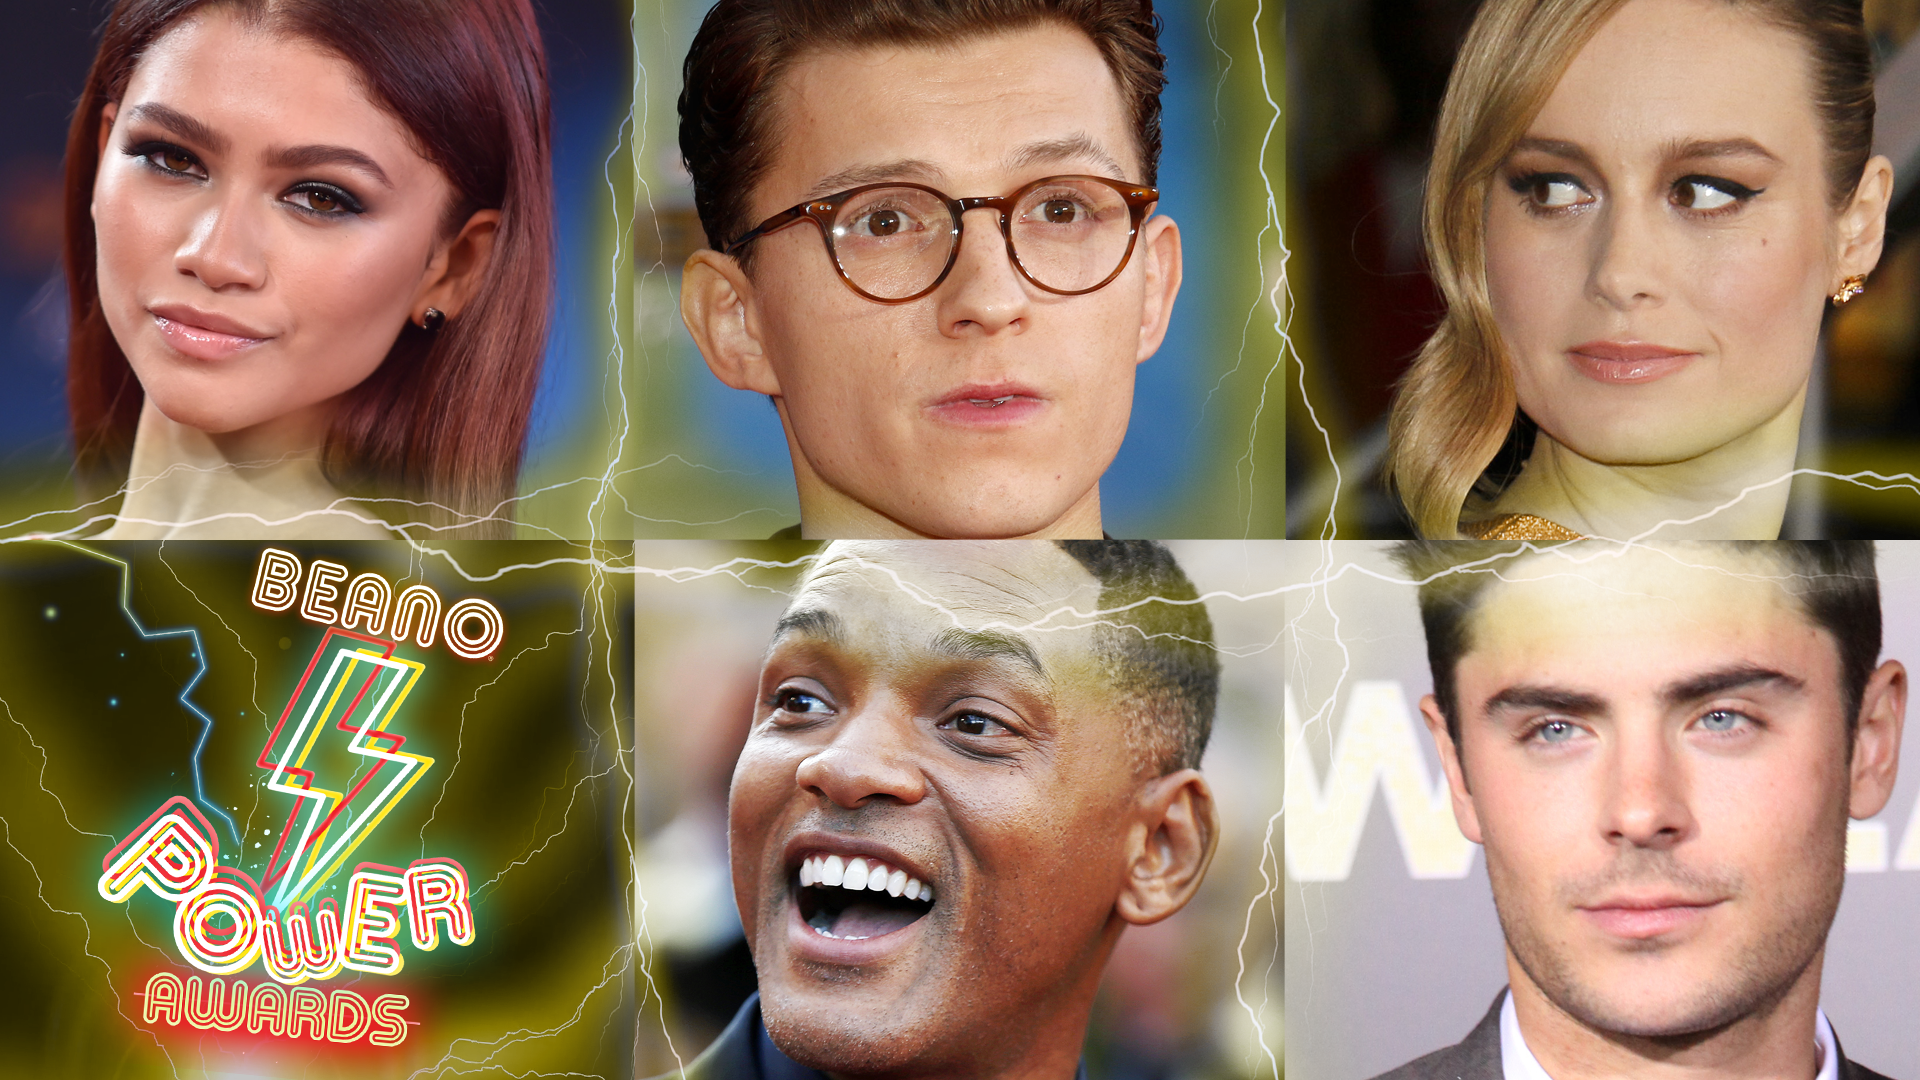 From top left to top right: Zendaya, Tom Holland, Brie Larson. From bottom left to bottom right: Beano Power Awards logo, Will Smith, Zac Efron